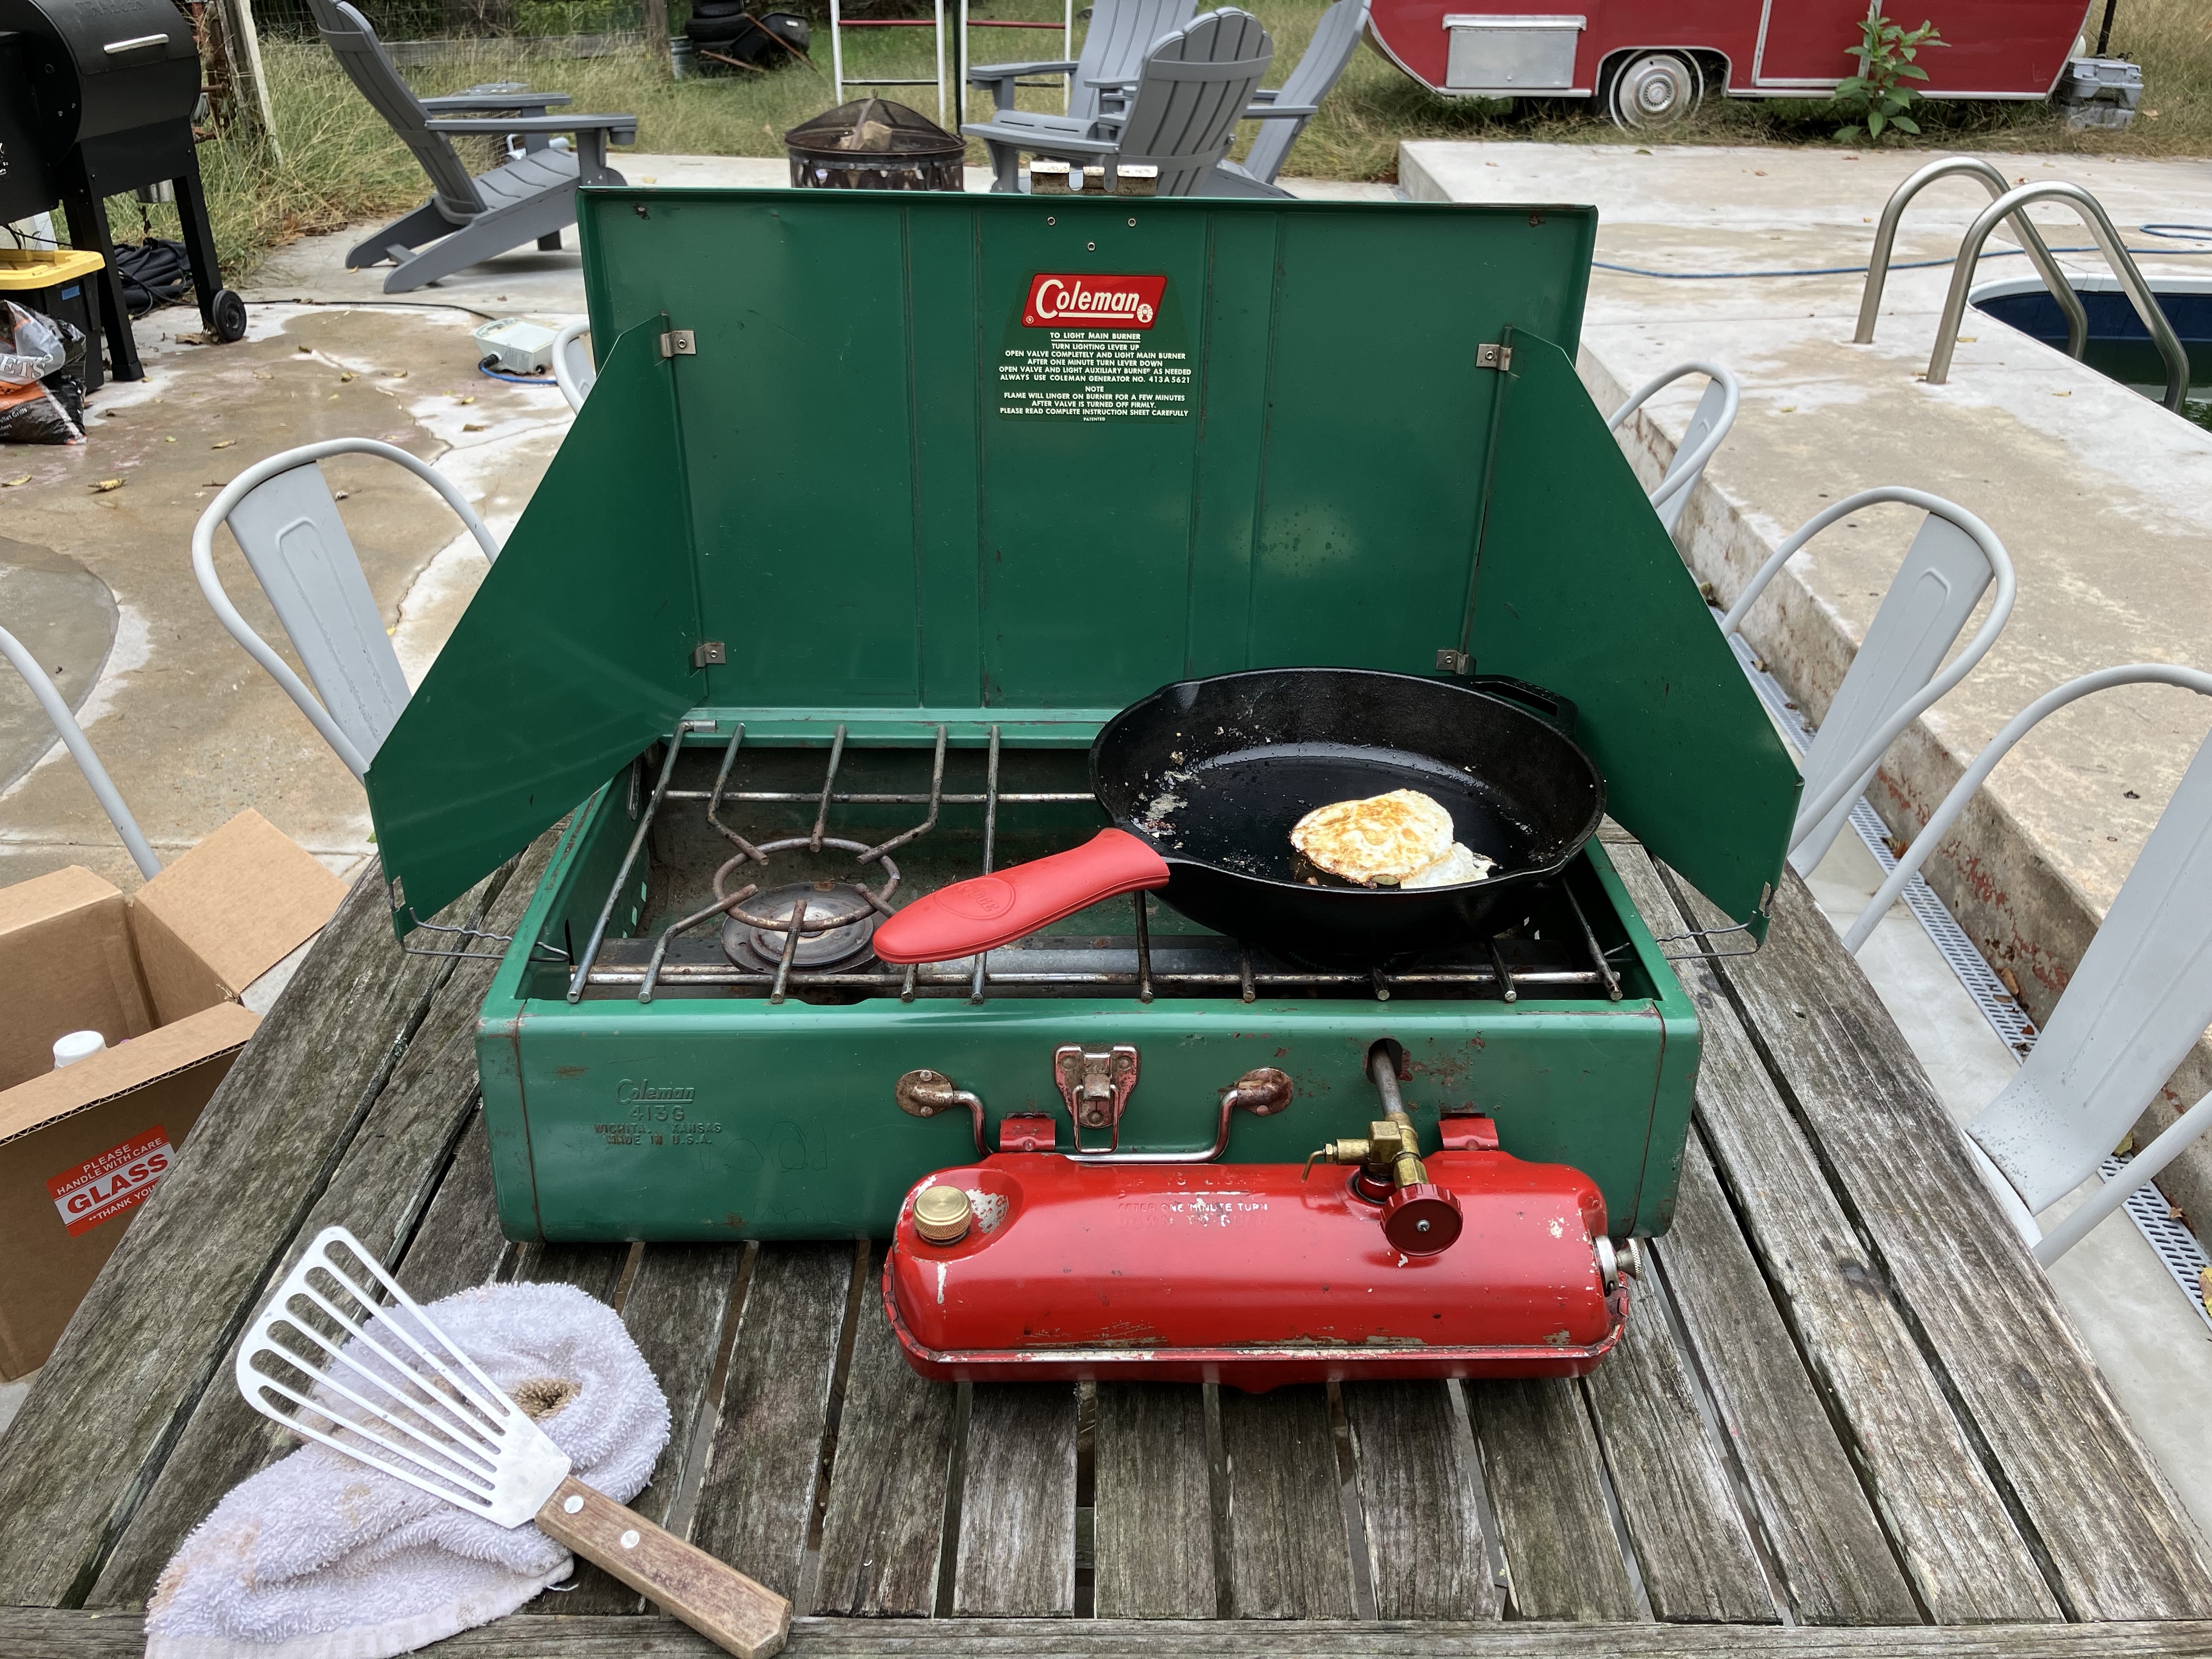 Putting the Coleman 413G camp stove to work!